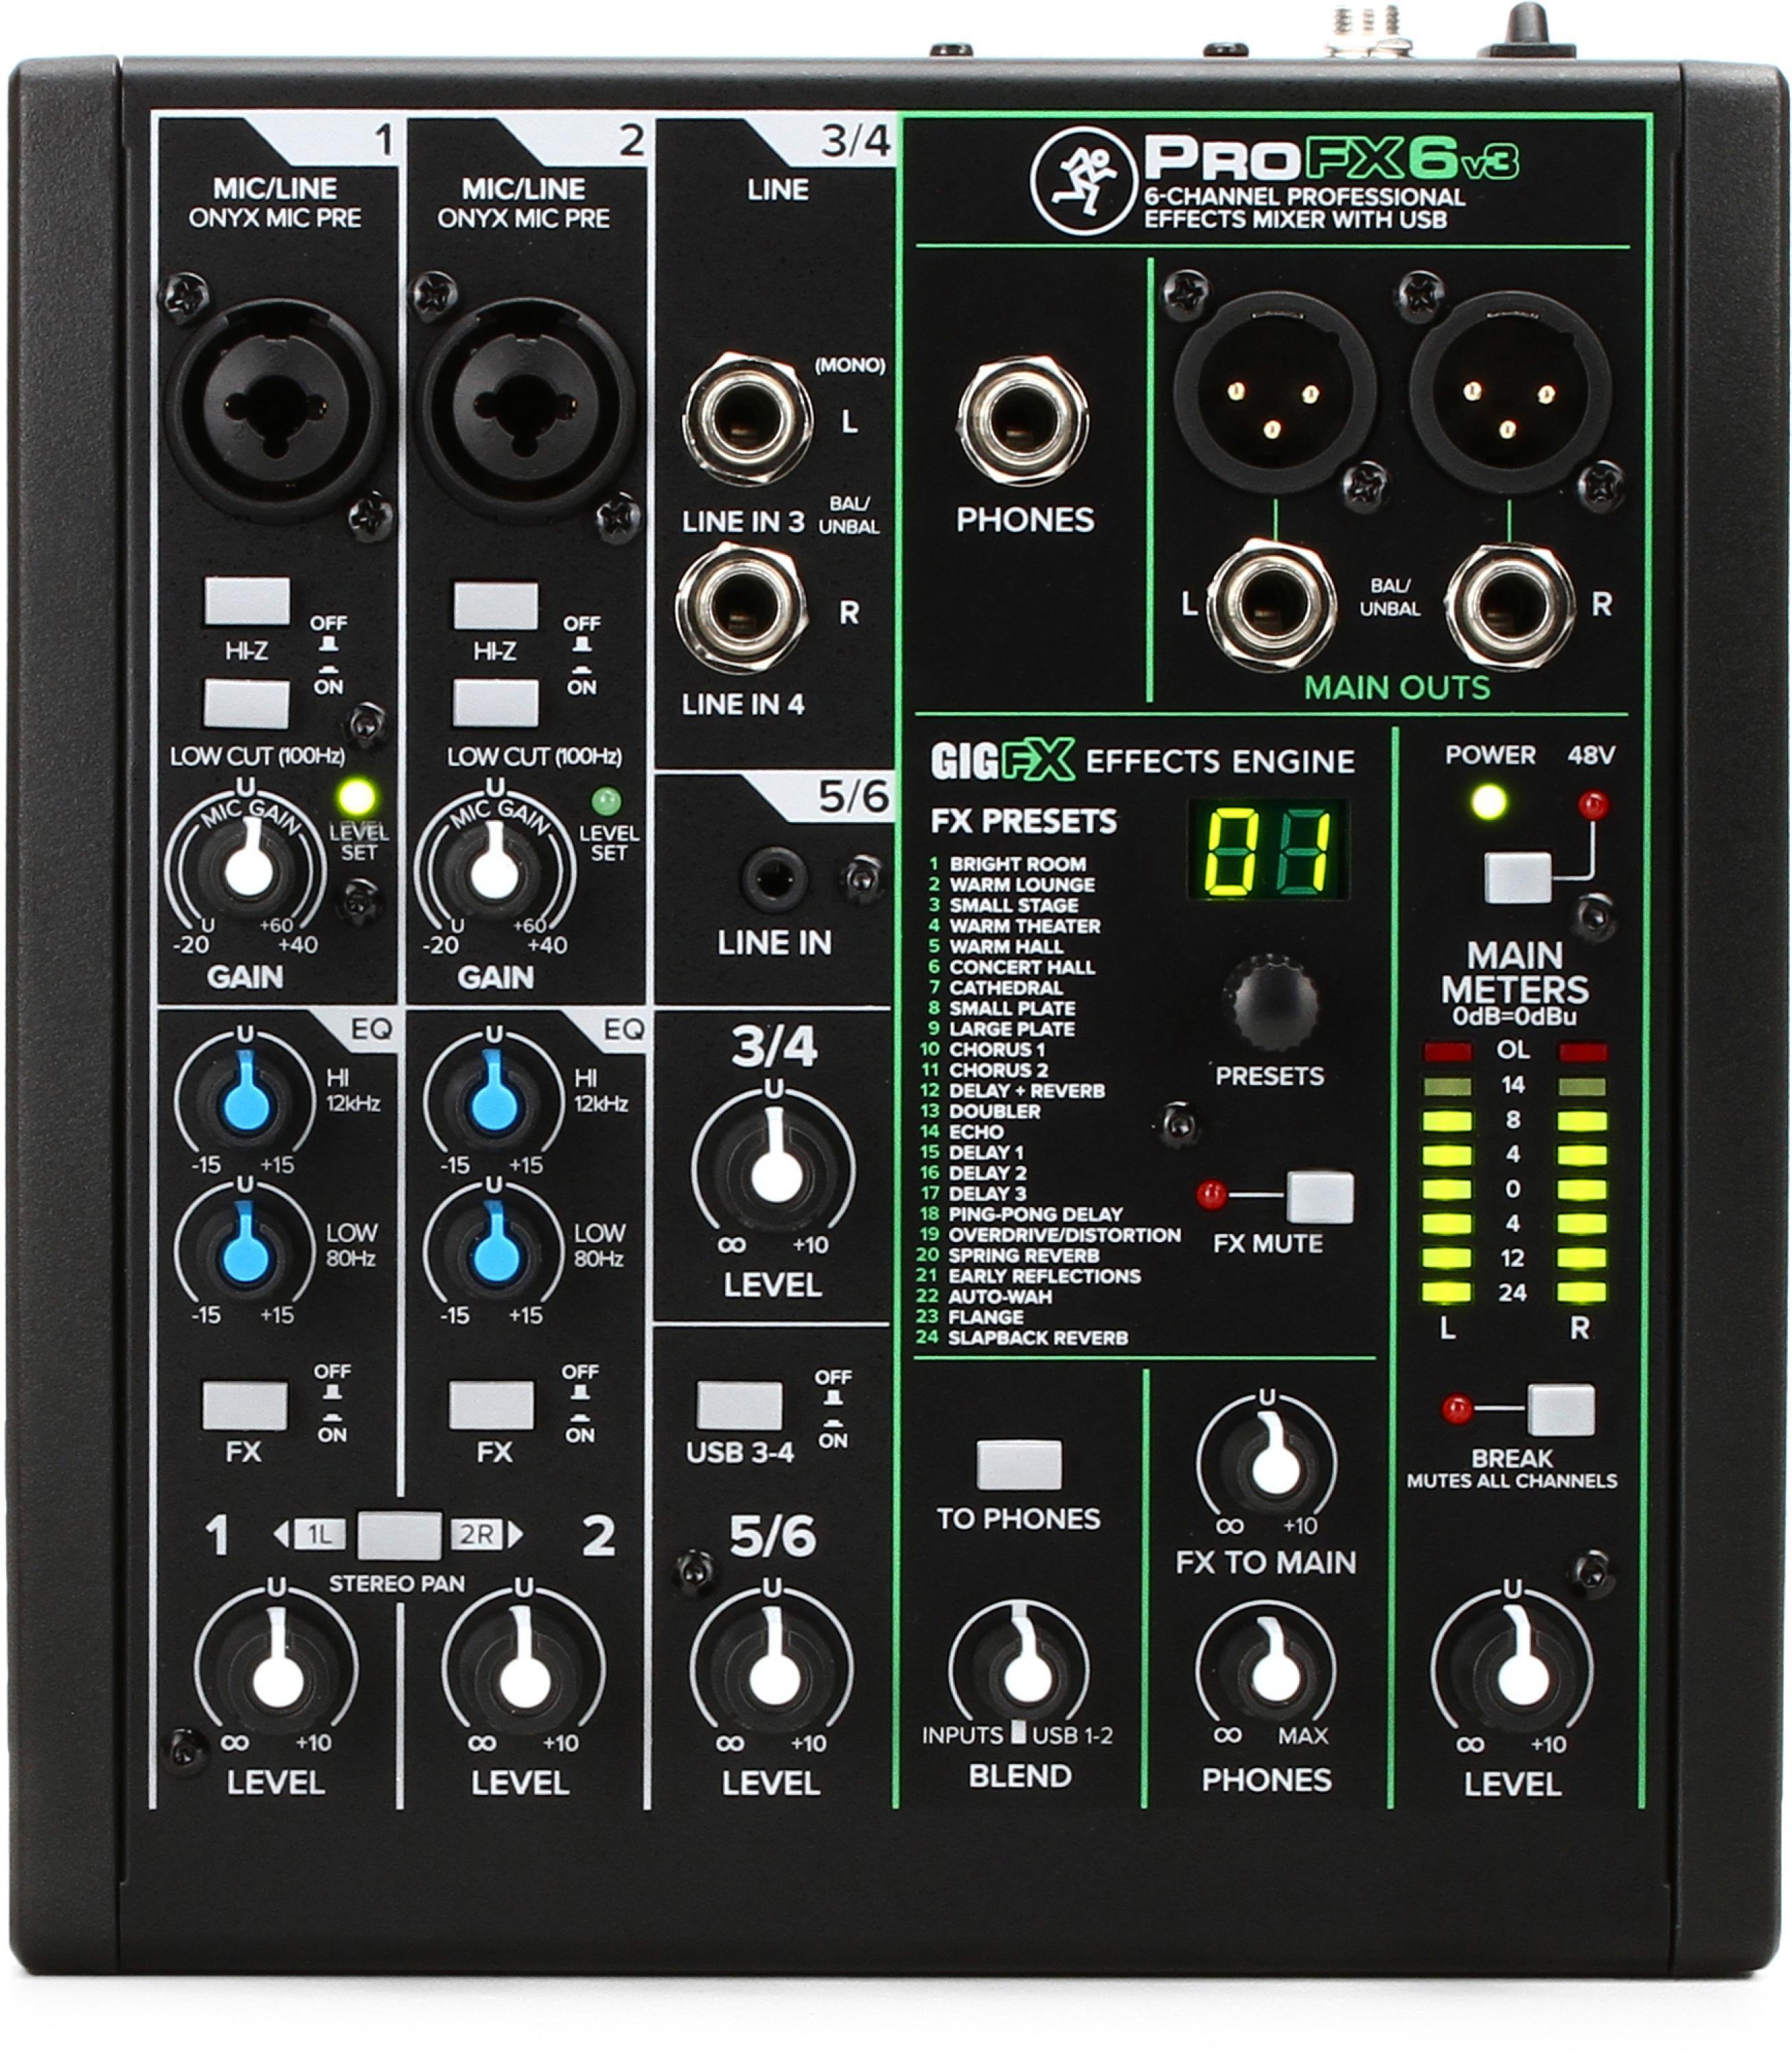 Bundled Item: Mackie ProFX6v3 6-channel Mixer with USB and Effects